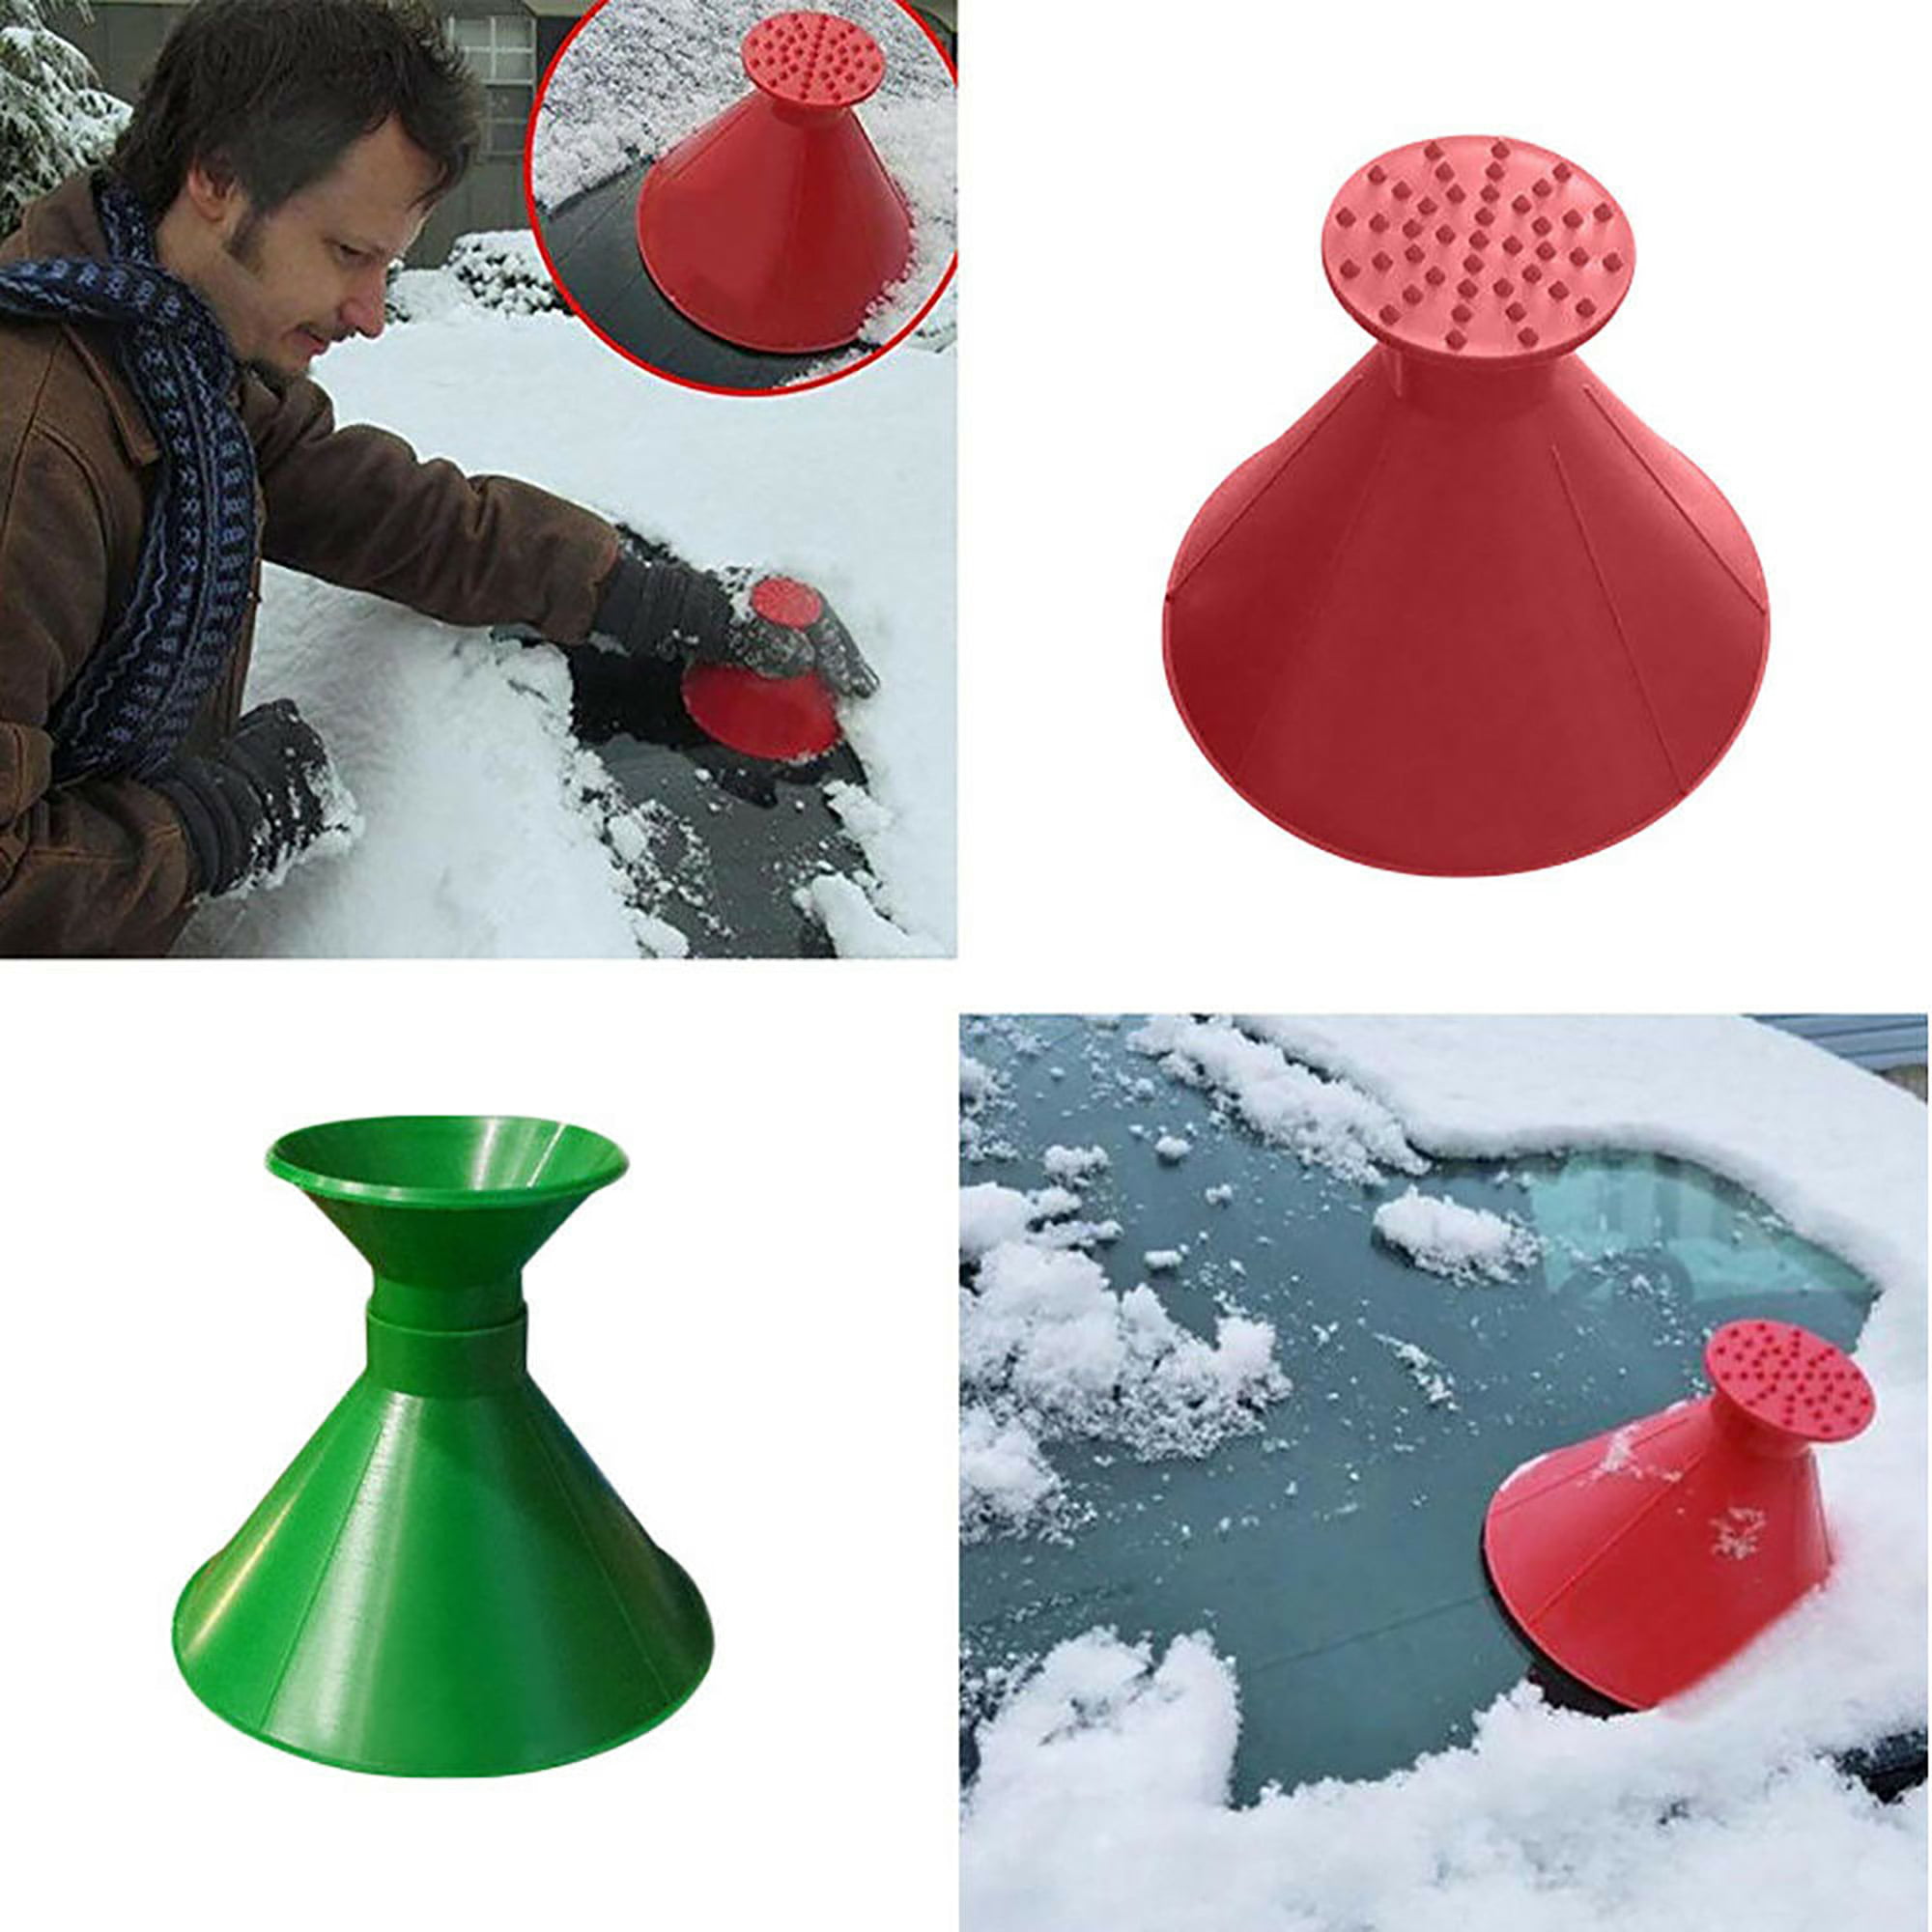 This Ingenious Cone-Shaped Ice Scraper Makes Windshield Scraping